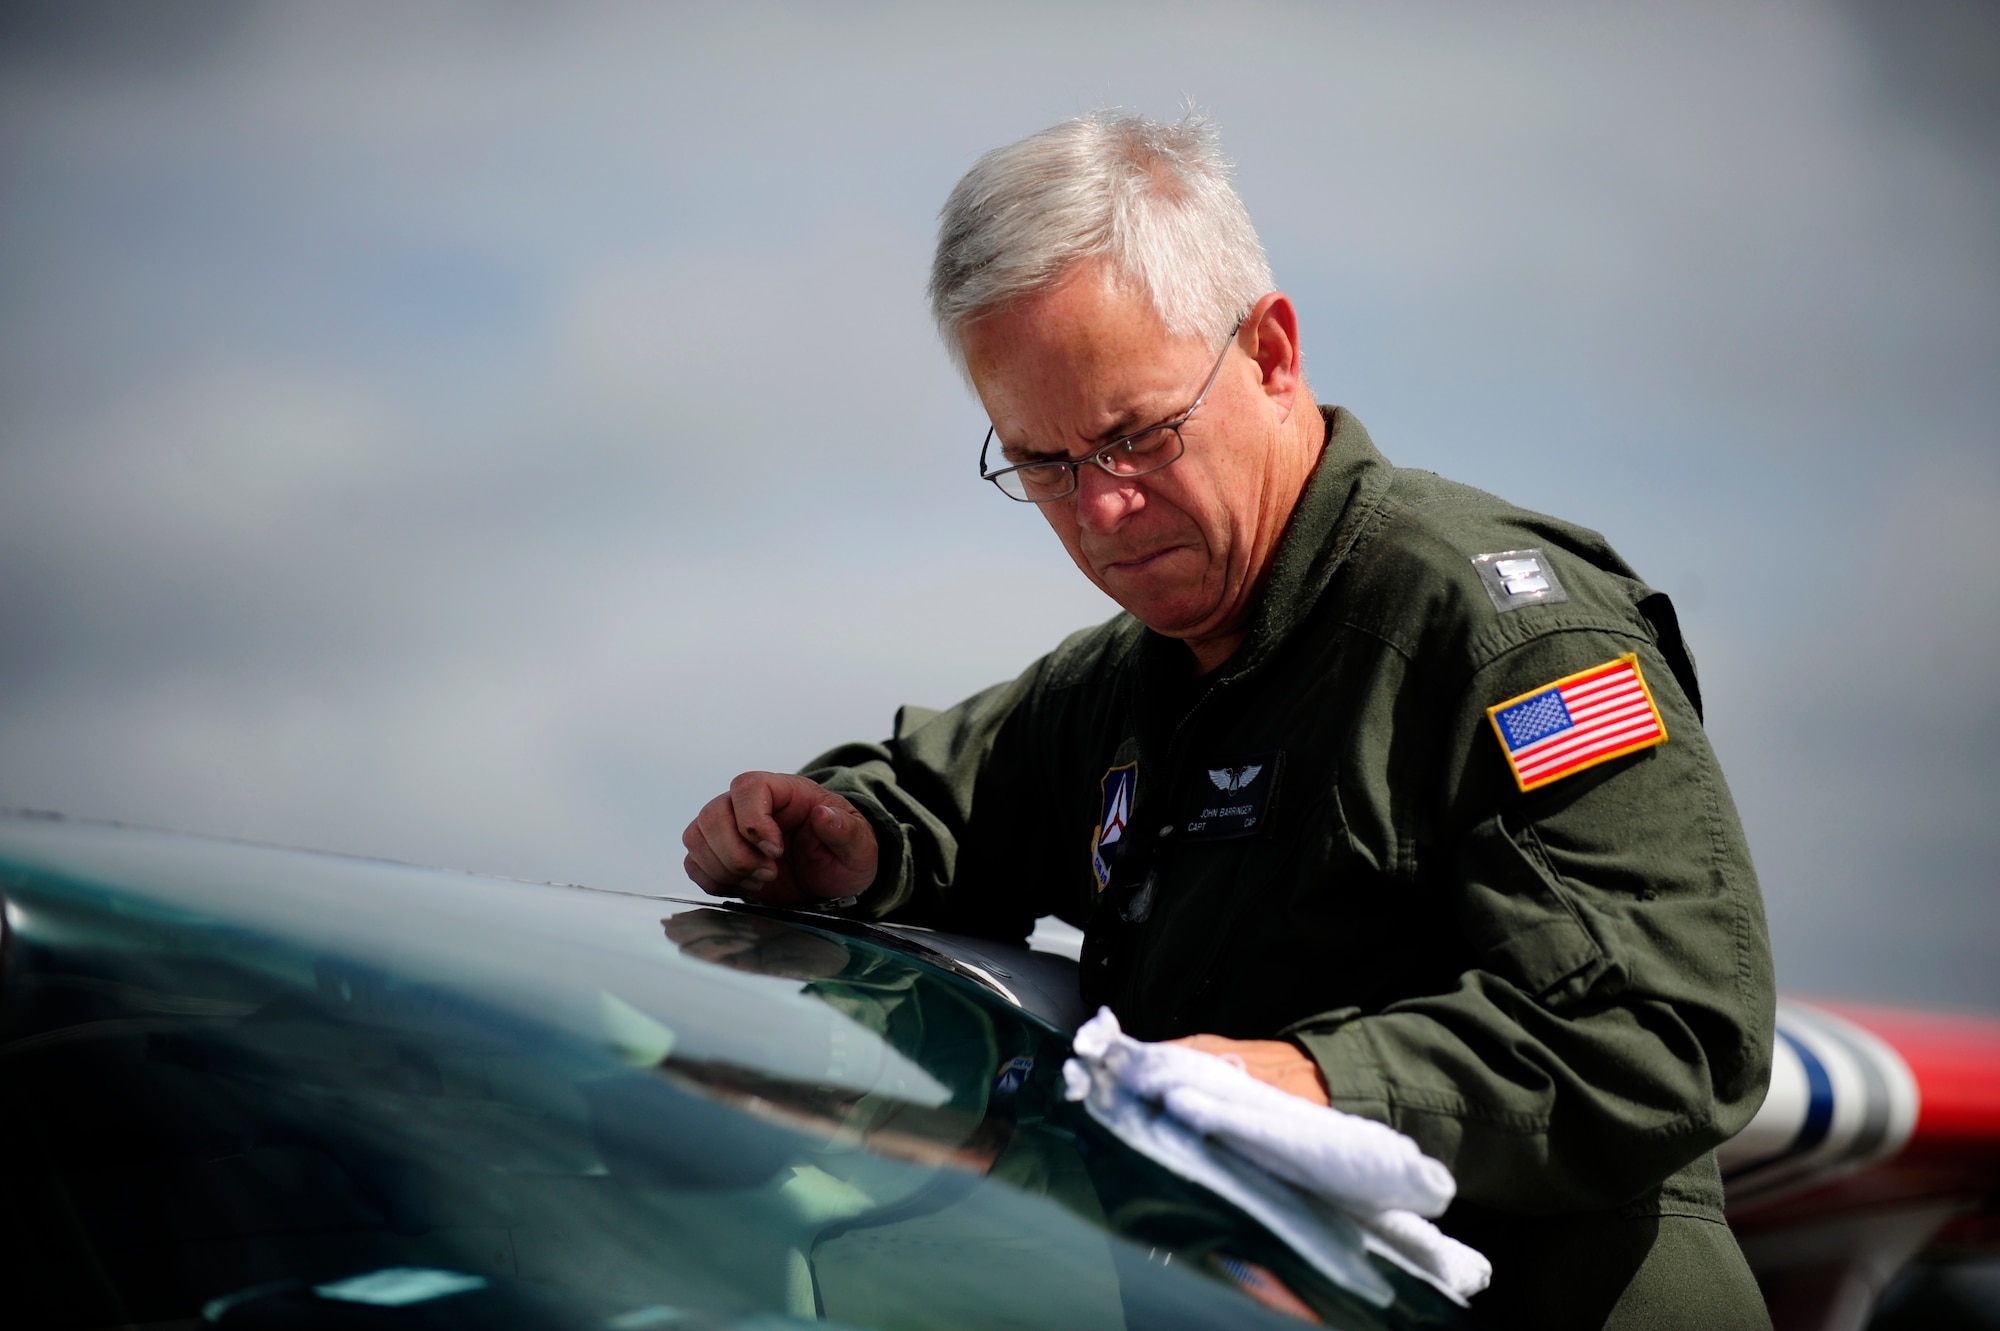 Capt. John Barringer, U.S. Air Force Auxiliary, Civil Air Patrol, cleans the windscreen of a C-182 Cessna before departing Astoria, Ore., during Amalgam Dart 2009, June 18. Amalgam Dart is a field test of the Department of Defense's ability to rapidly deploy a total air integrated defense system in the U.S. in order to deter, detect and defeat airborne threats. (U.S. Air Force photo by Staff Sgt. Jacob N. Bailey)